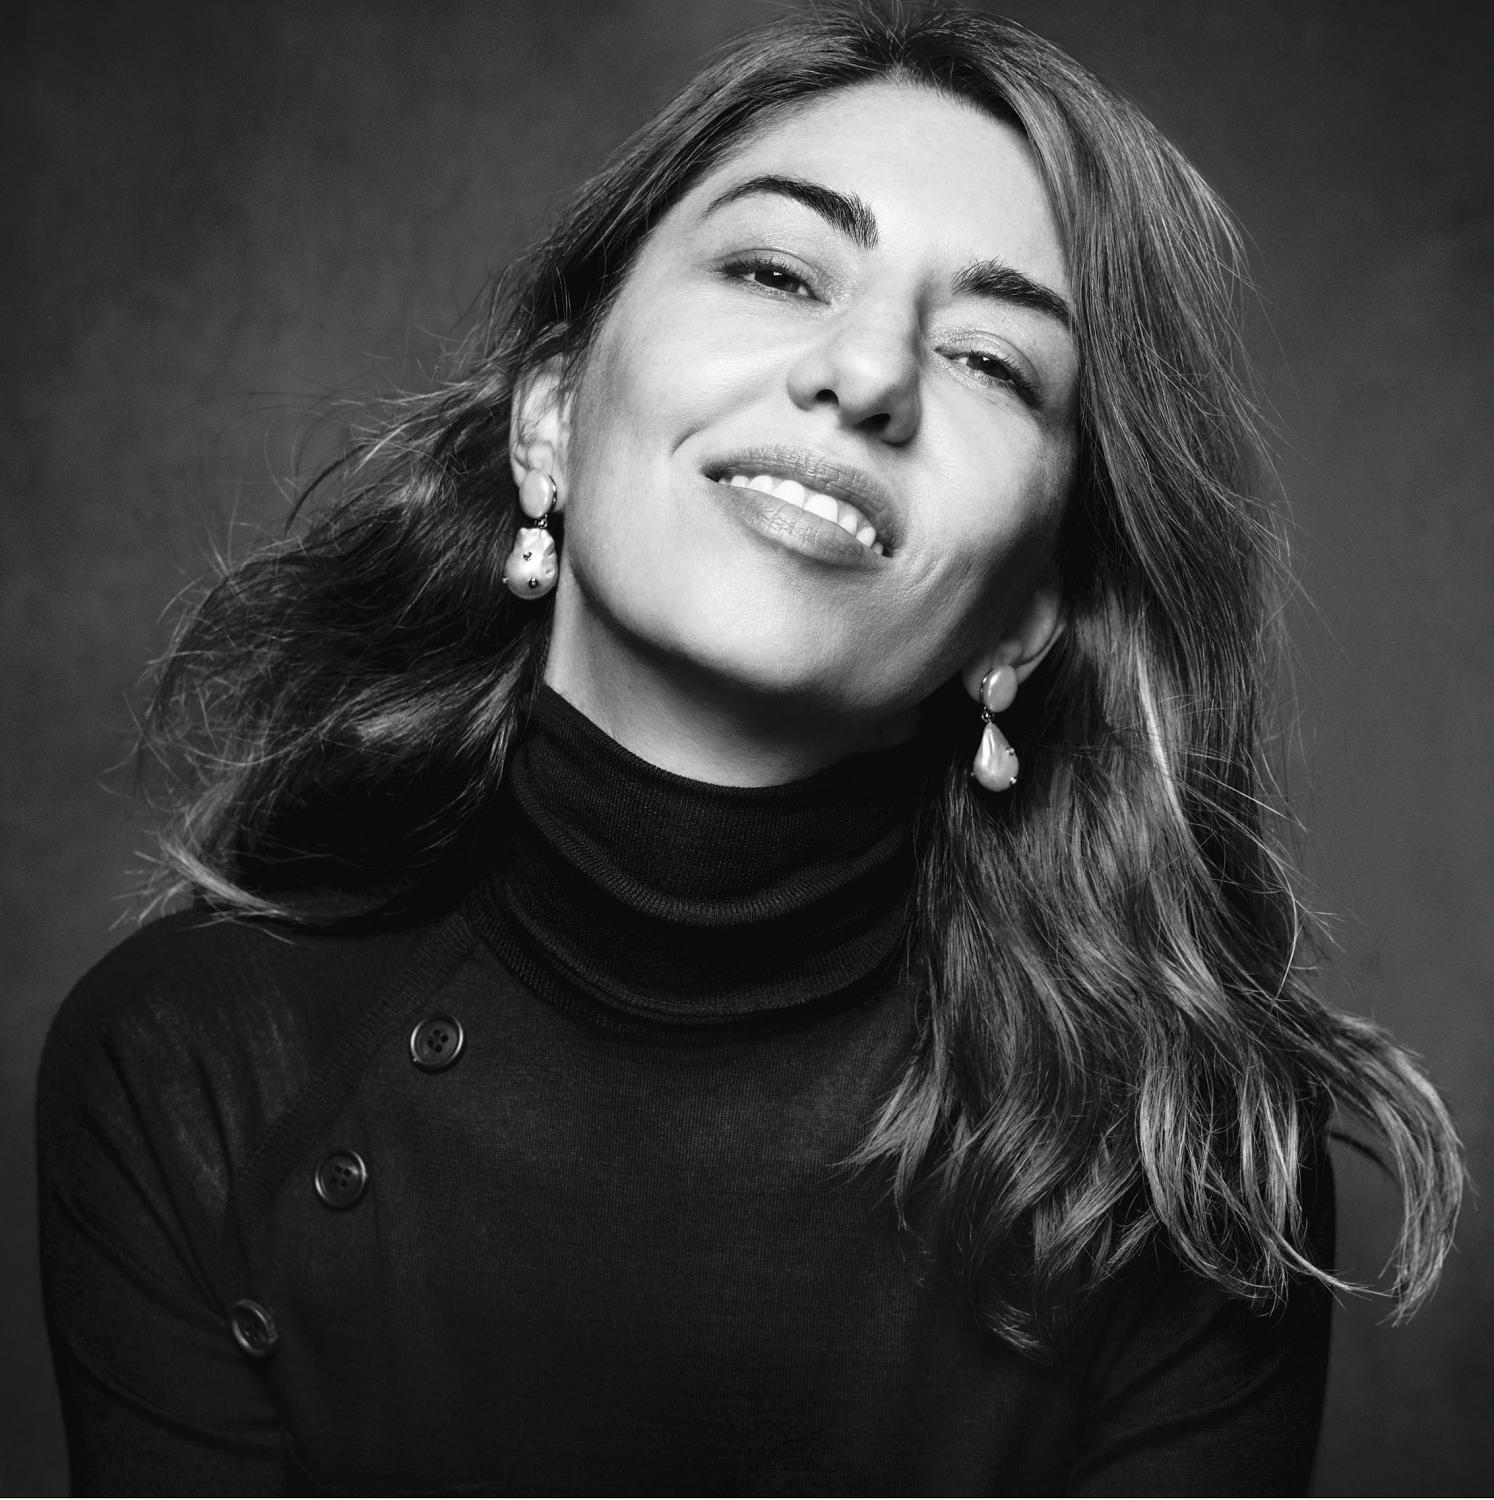 Sofia Coppola on 'fun' filming for Chanel, avoiding social media, saying no  to blockbusters, and how her love for fashion influences her work